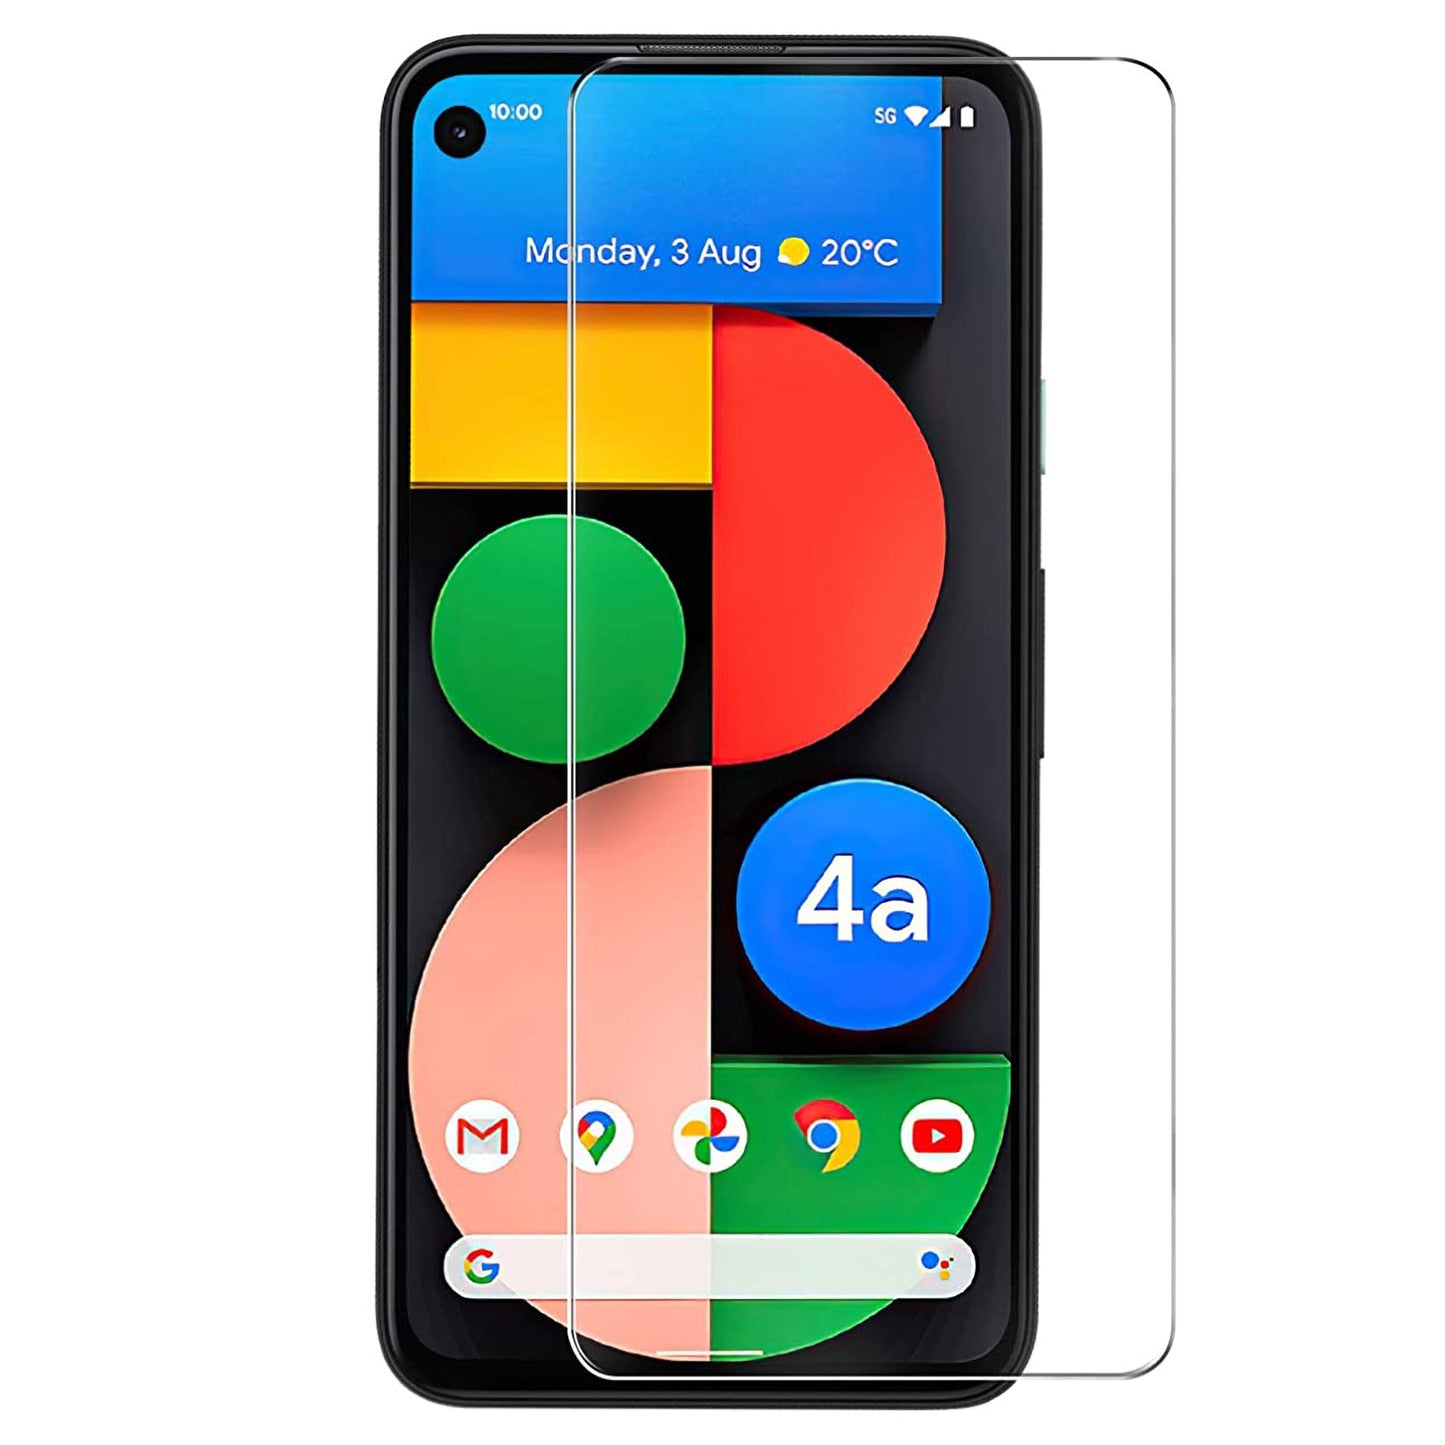 [2 Pack] MEZON Google Pixel 4a 5G (6.2") Tempered Glass Crystal Clear Premium 9H HD Case Friendly Screen Protector